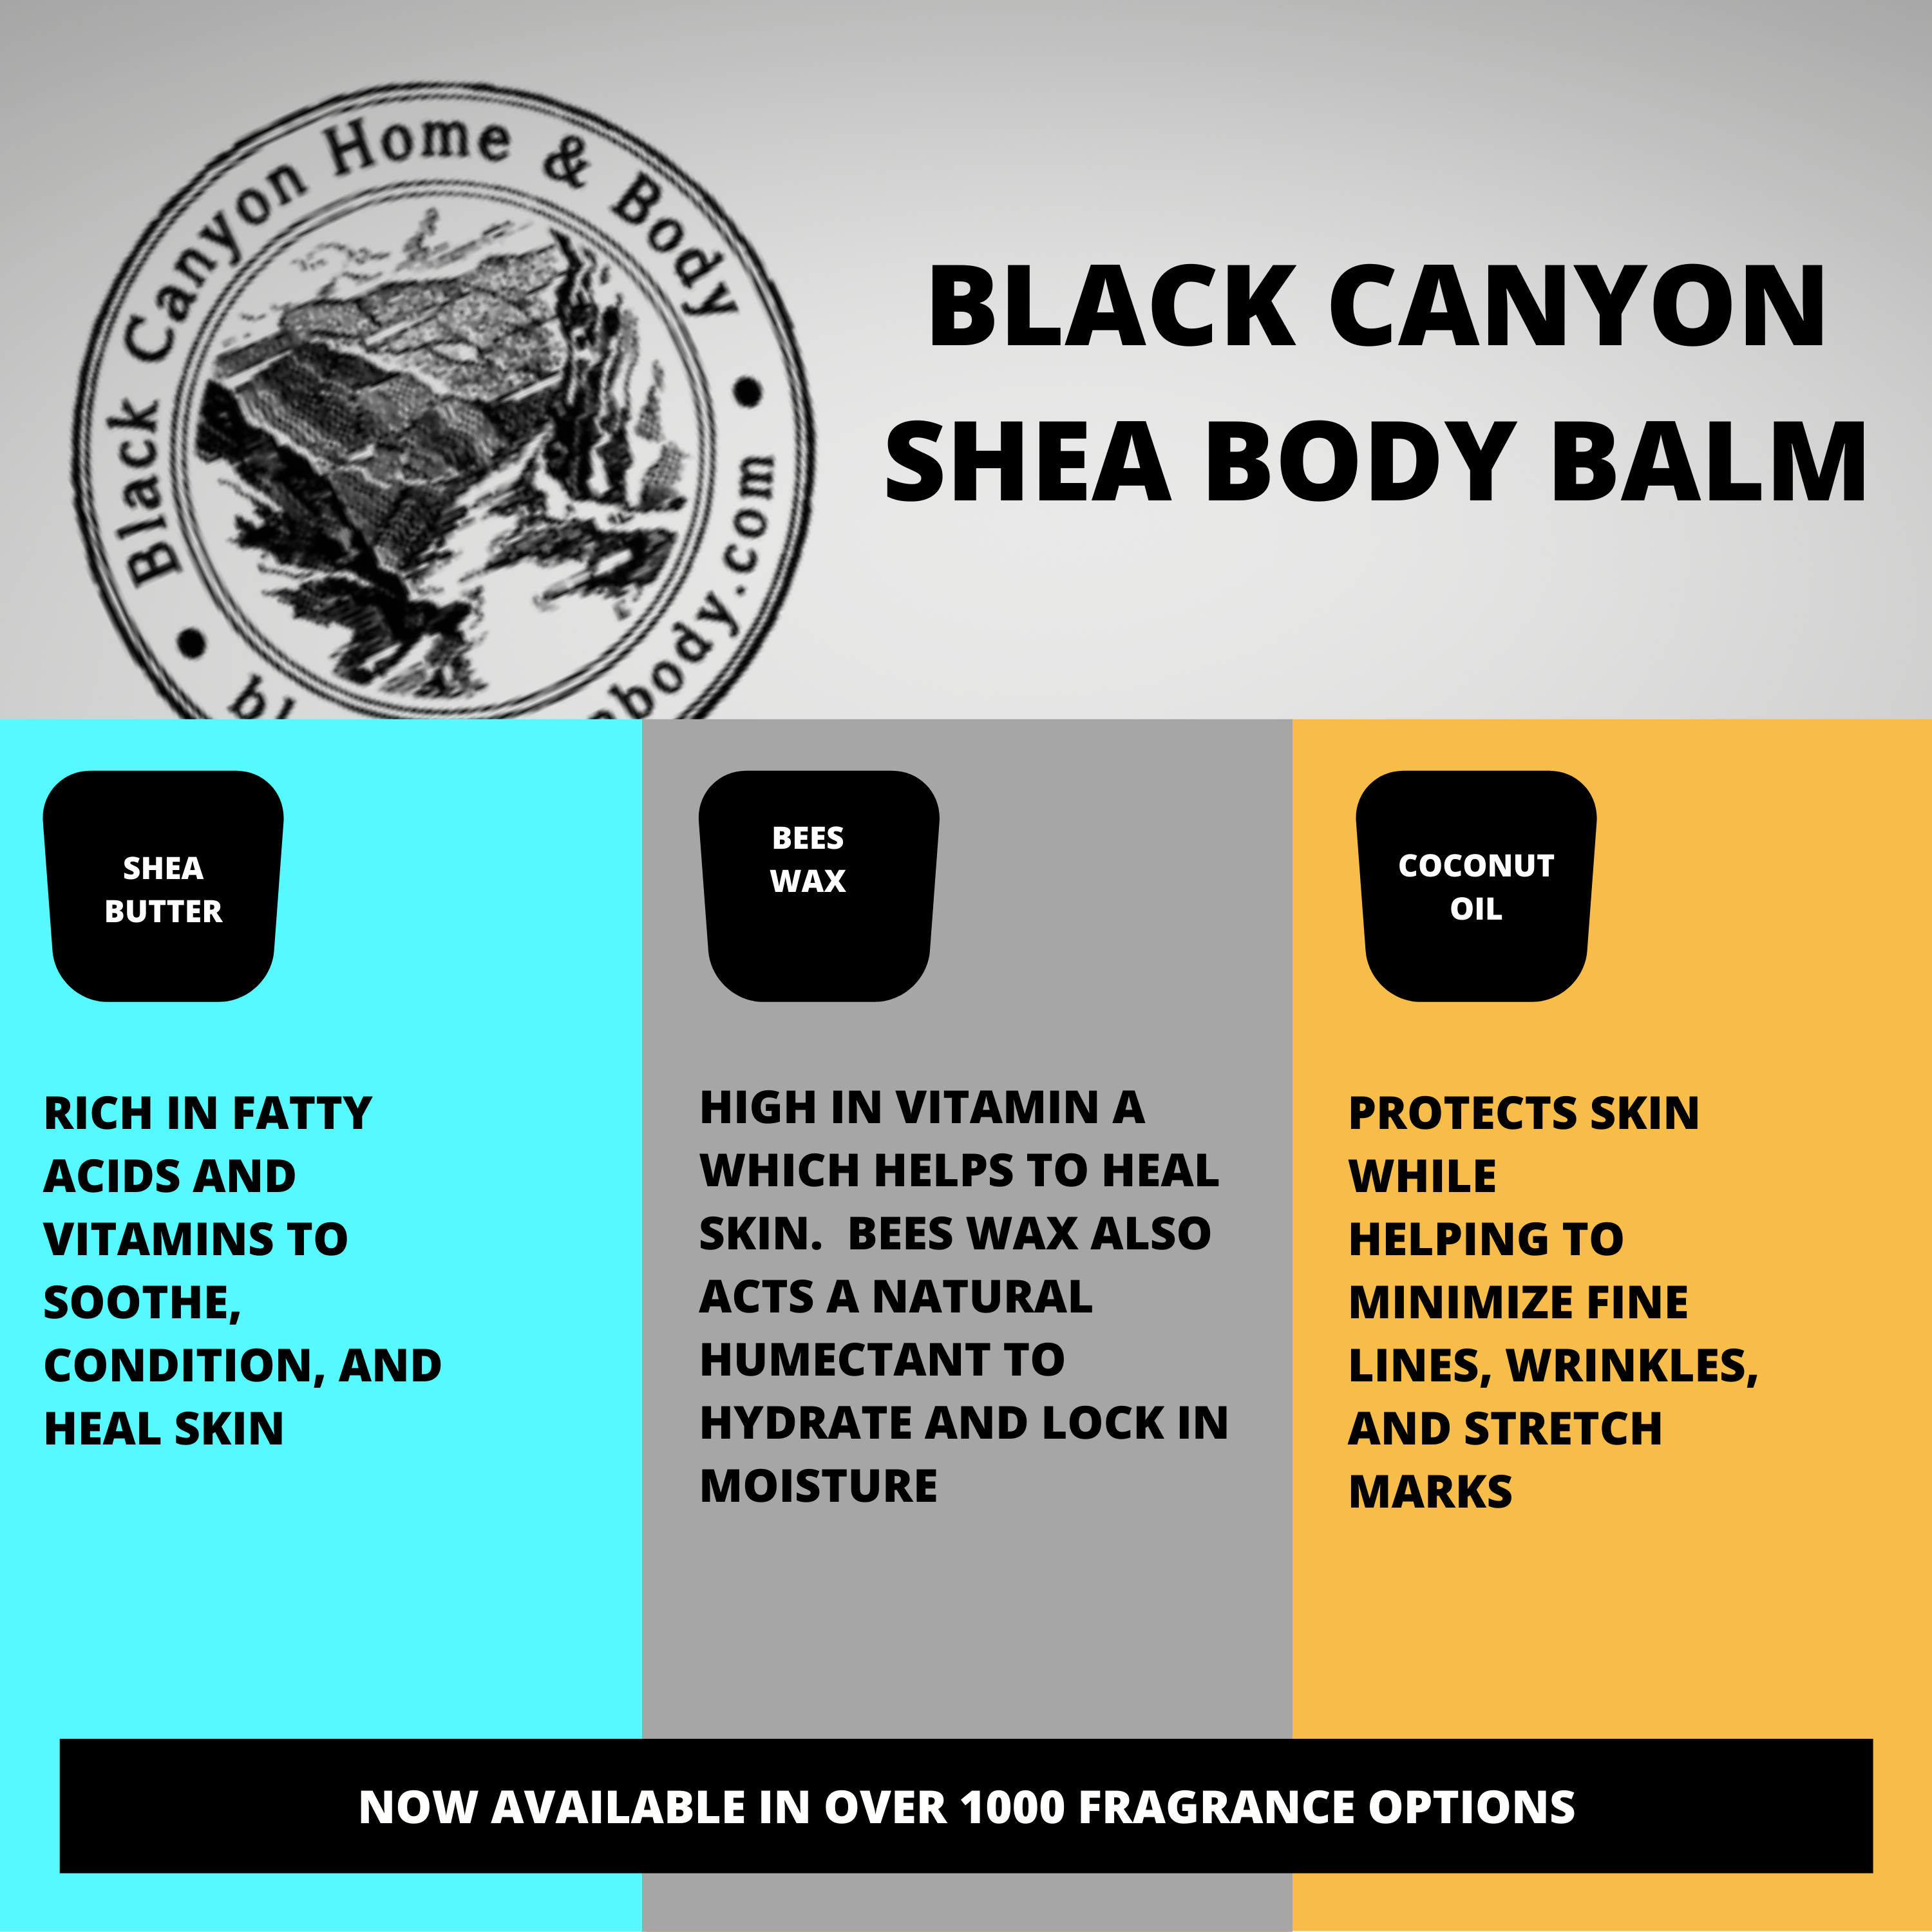 Black Canyon Black Currant & Jasmine Scented Natural Body Balm with Shea